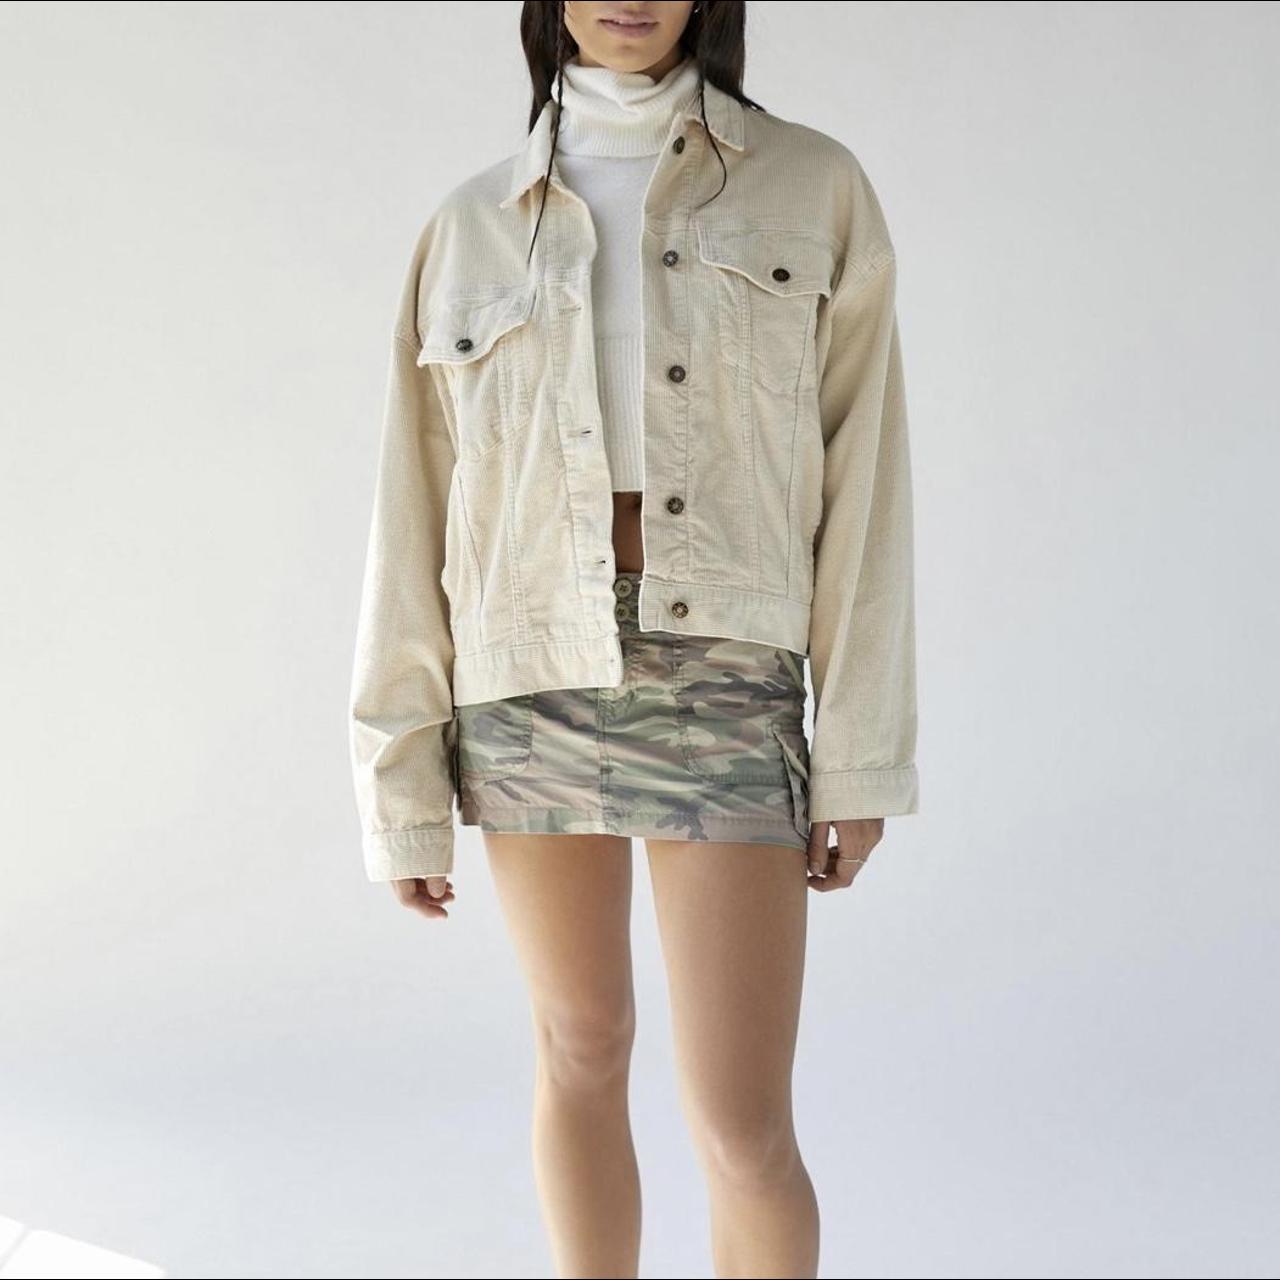 Urban Outfitters Women's Cream Jacket